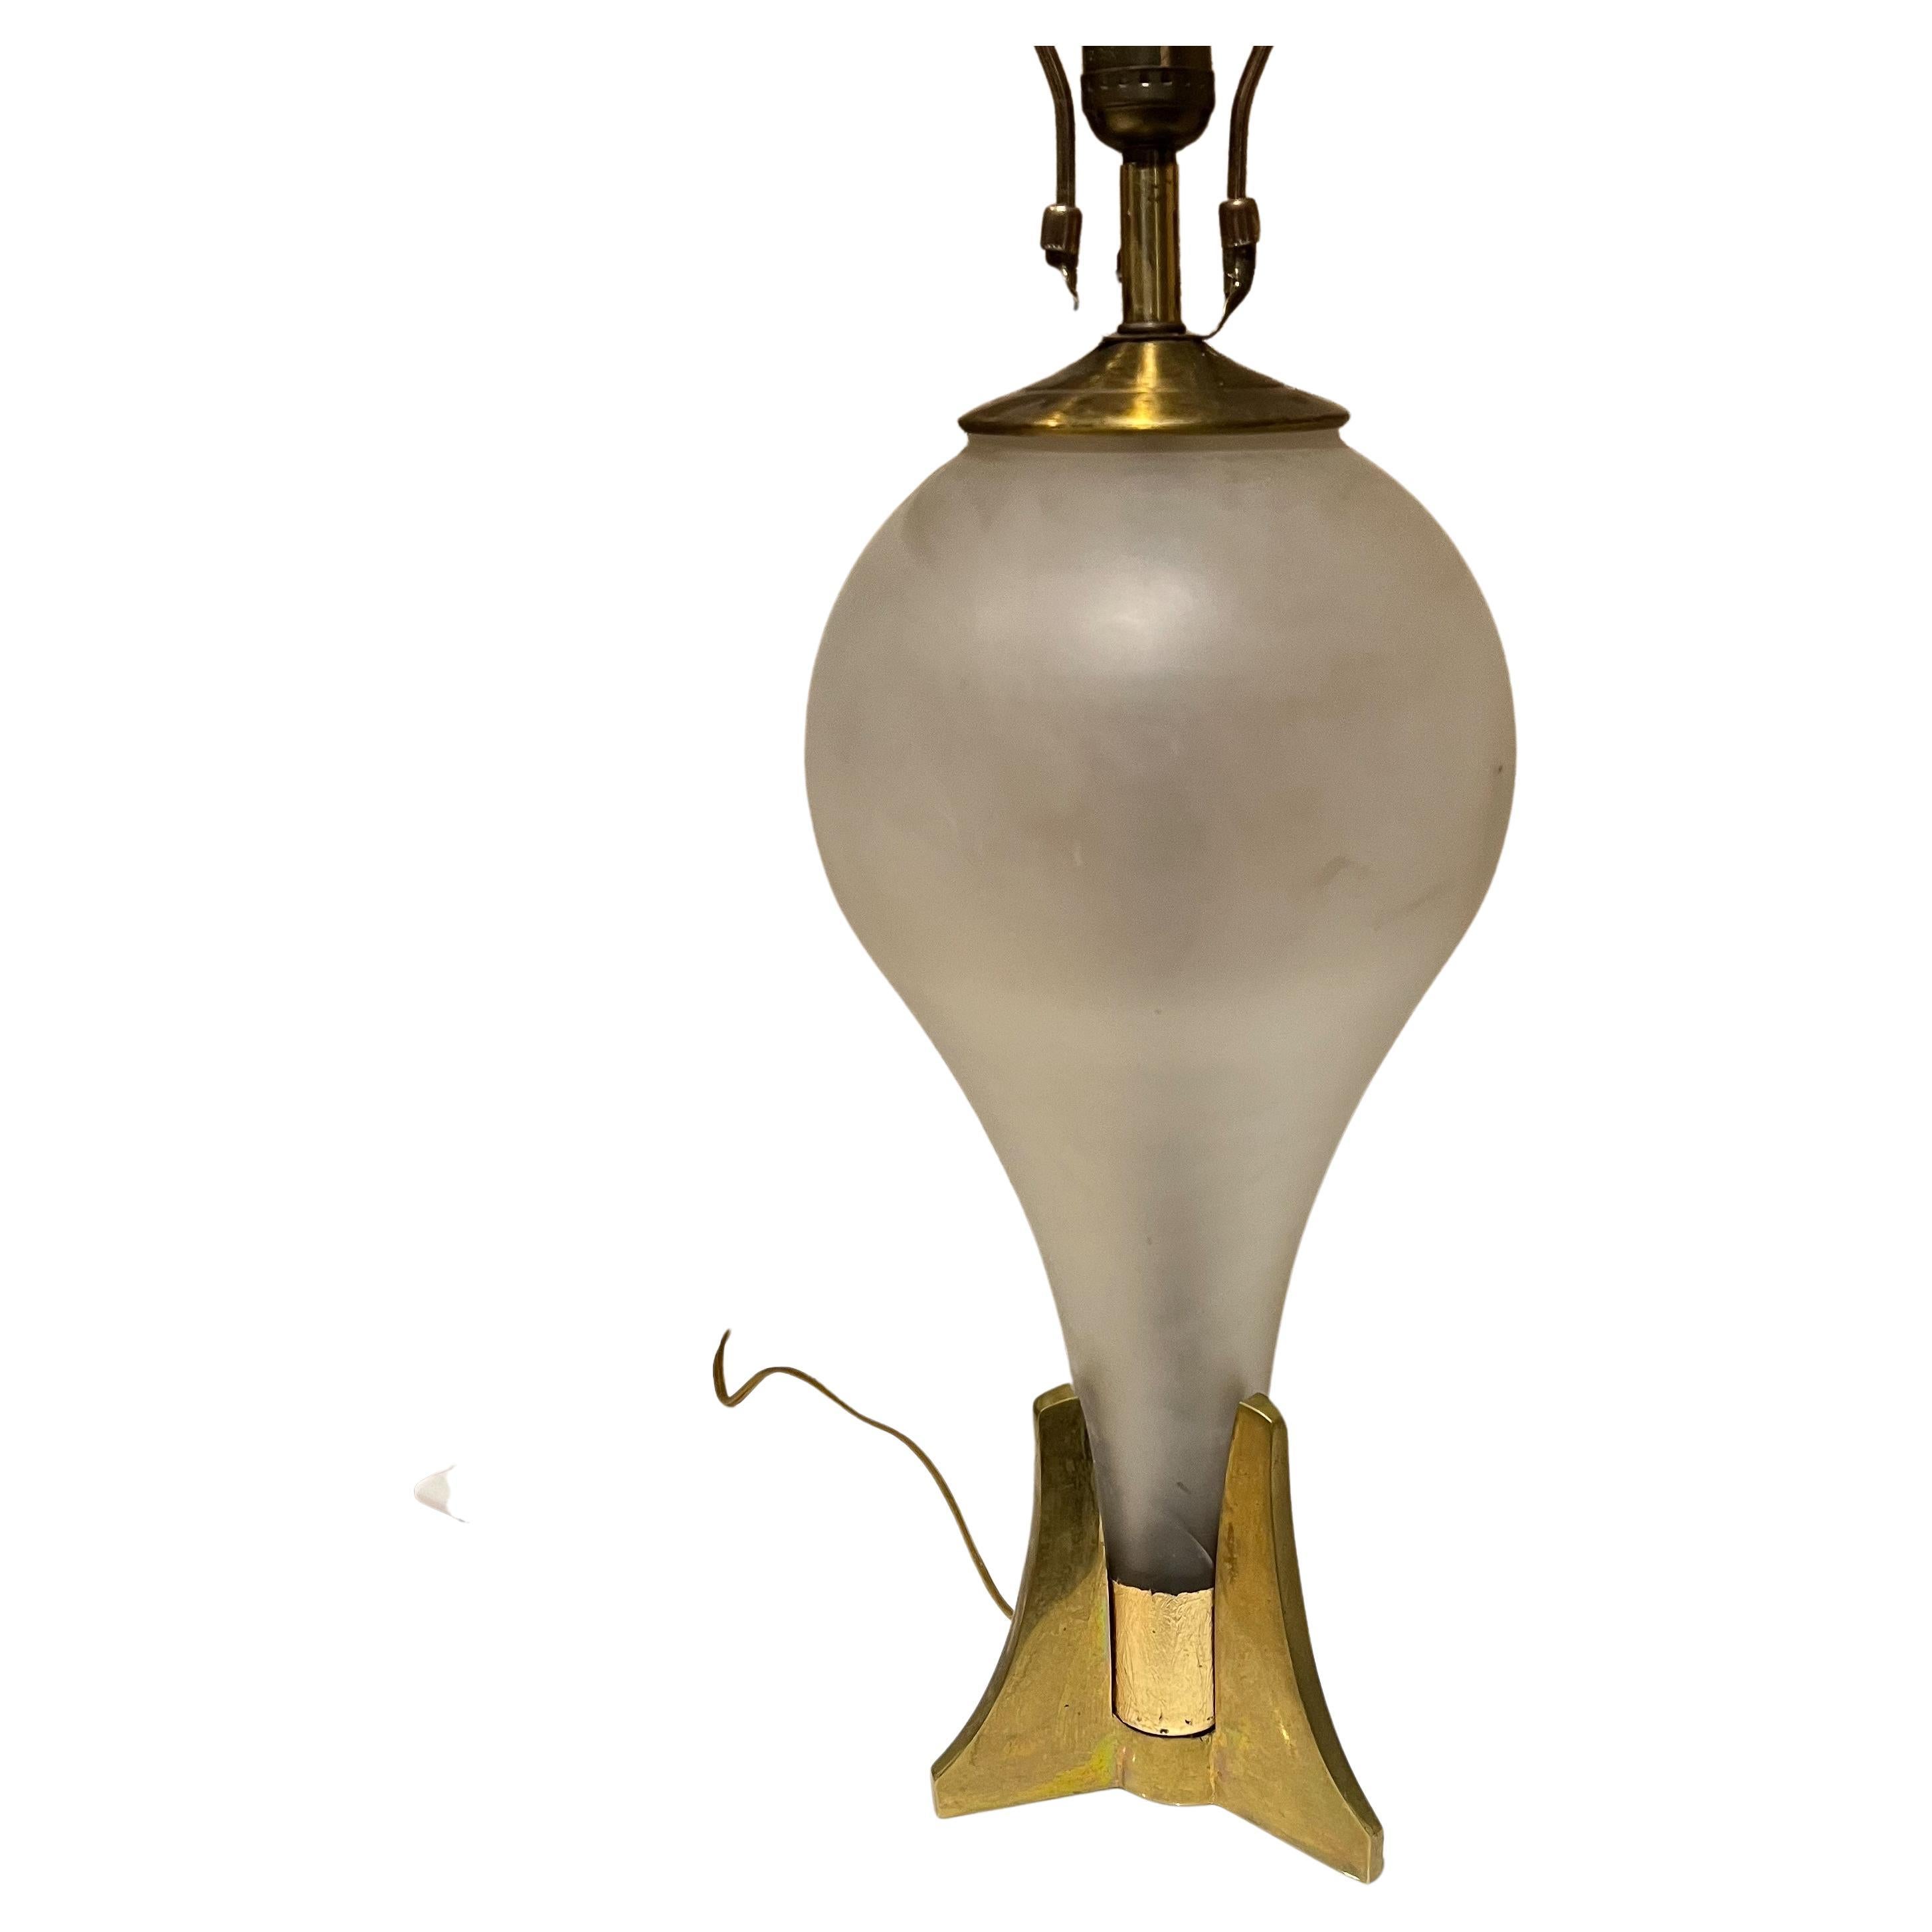 Table lamp
Stylish midcentury sculptural brass and opaline glass single table lamp
Lamp only, no shade is included
Measures: 22.5 tall x 7 diameter
Preowned unrestored vintage condition.
See images please.
   